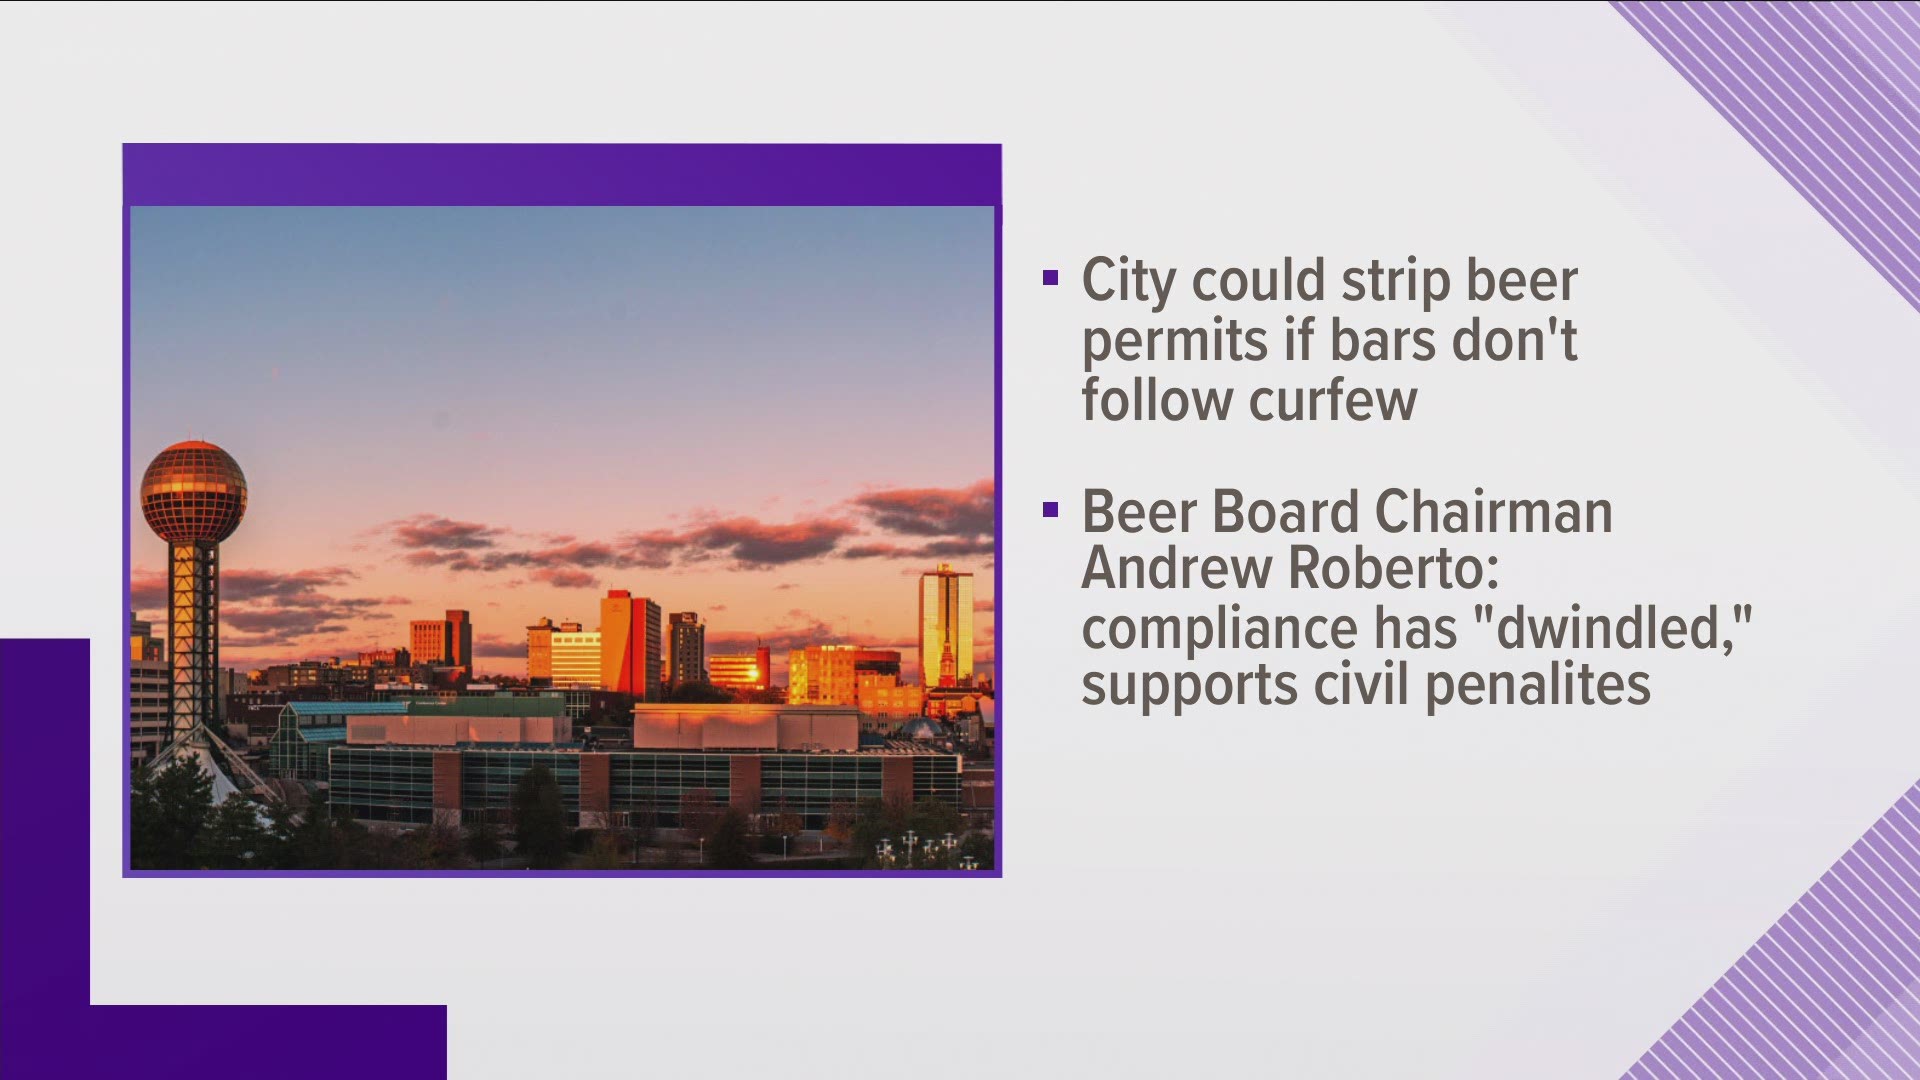 The emergency ordinances call for allowing the city to strip beer permits from bars failing to follow the 11 p.m. curfew order.